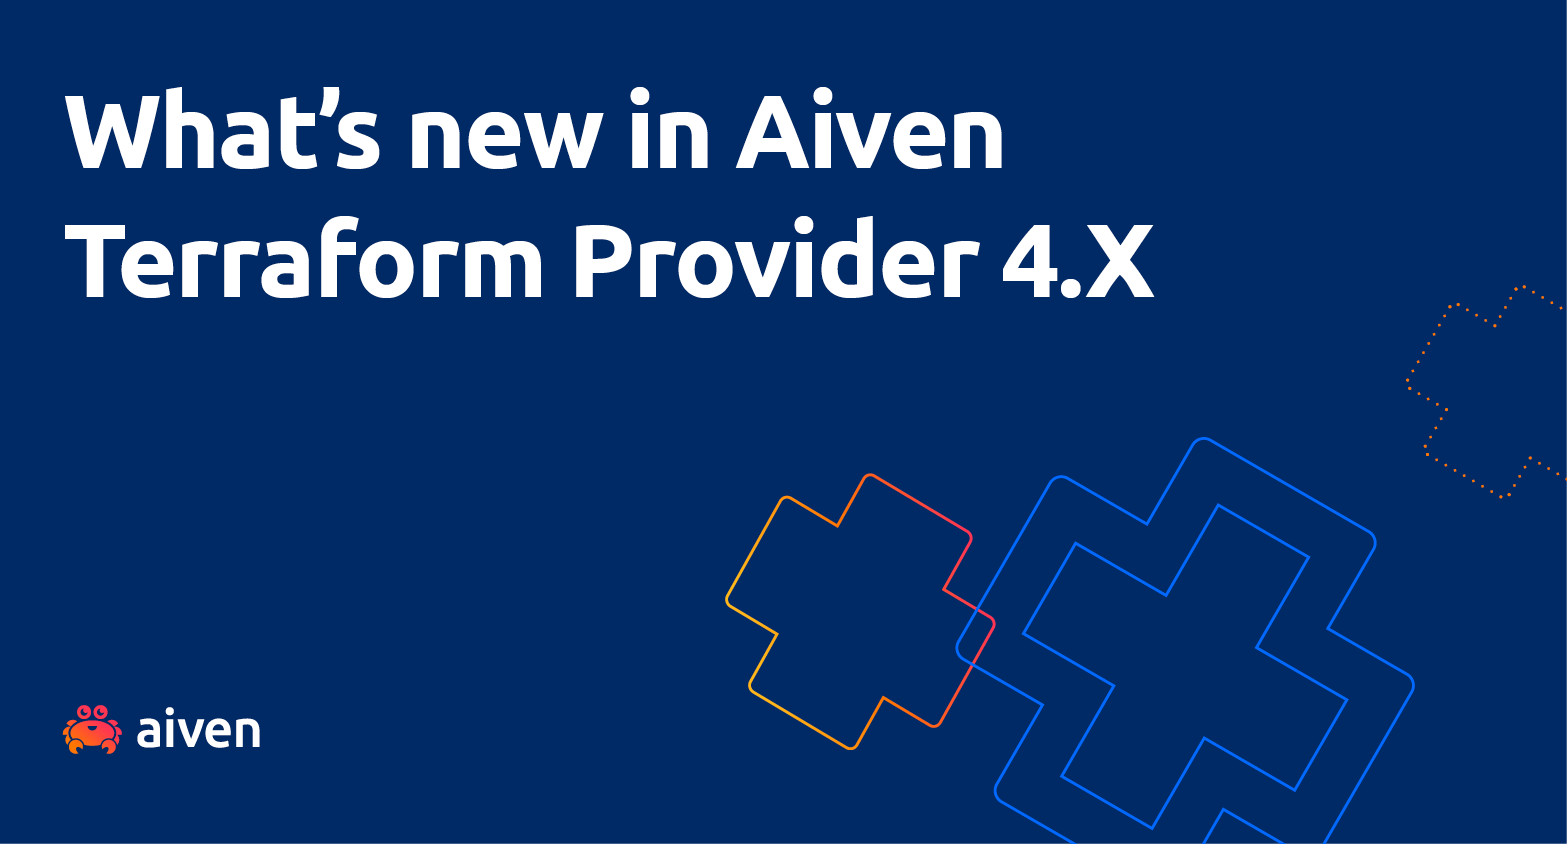 The text "What's new in Aiven Terraform Provider 4.X" against a blue background, with the Aiven cuddly crab logo at the bottom left